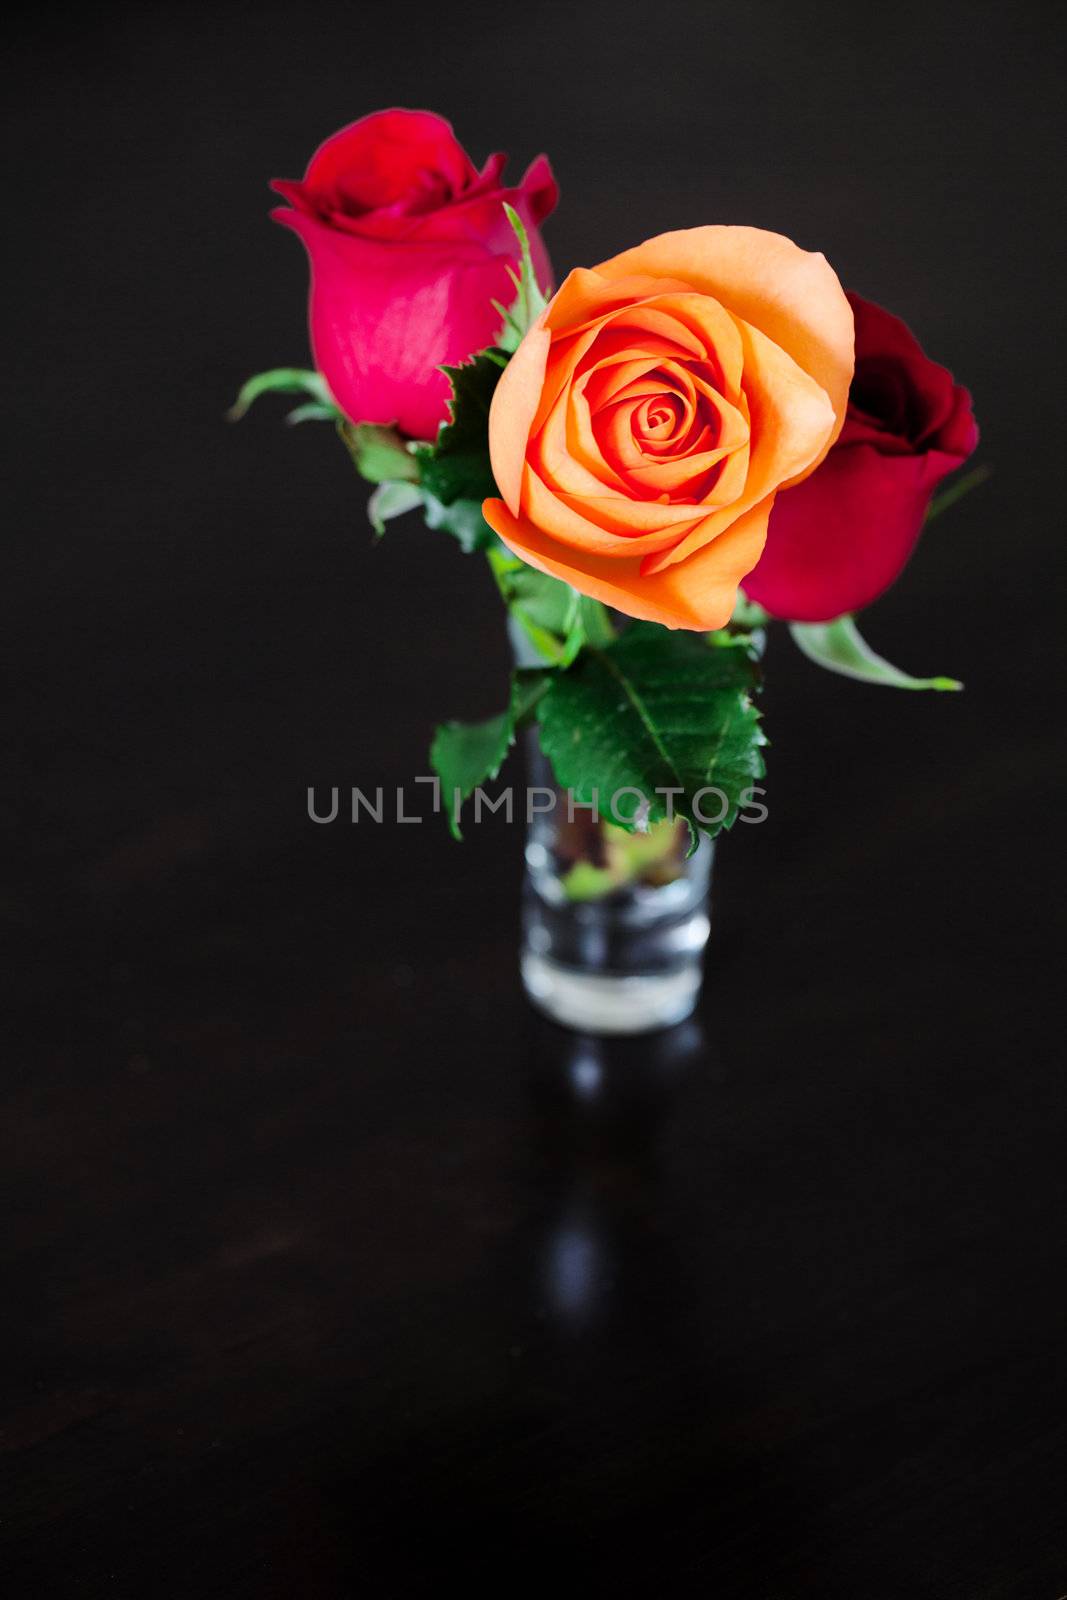 bouquet of colorful roses in a vase on a wooden table by jannyjus